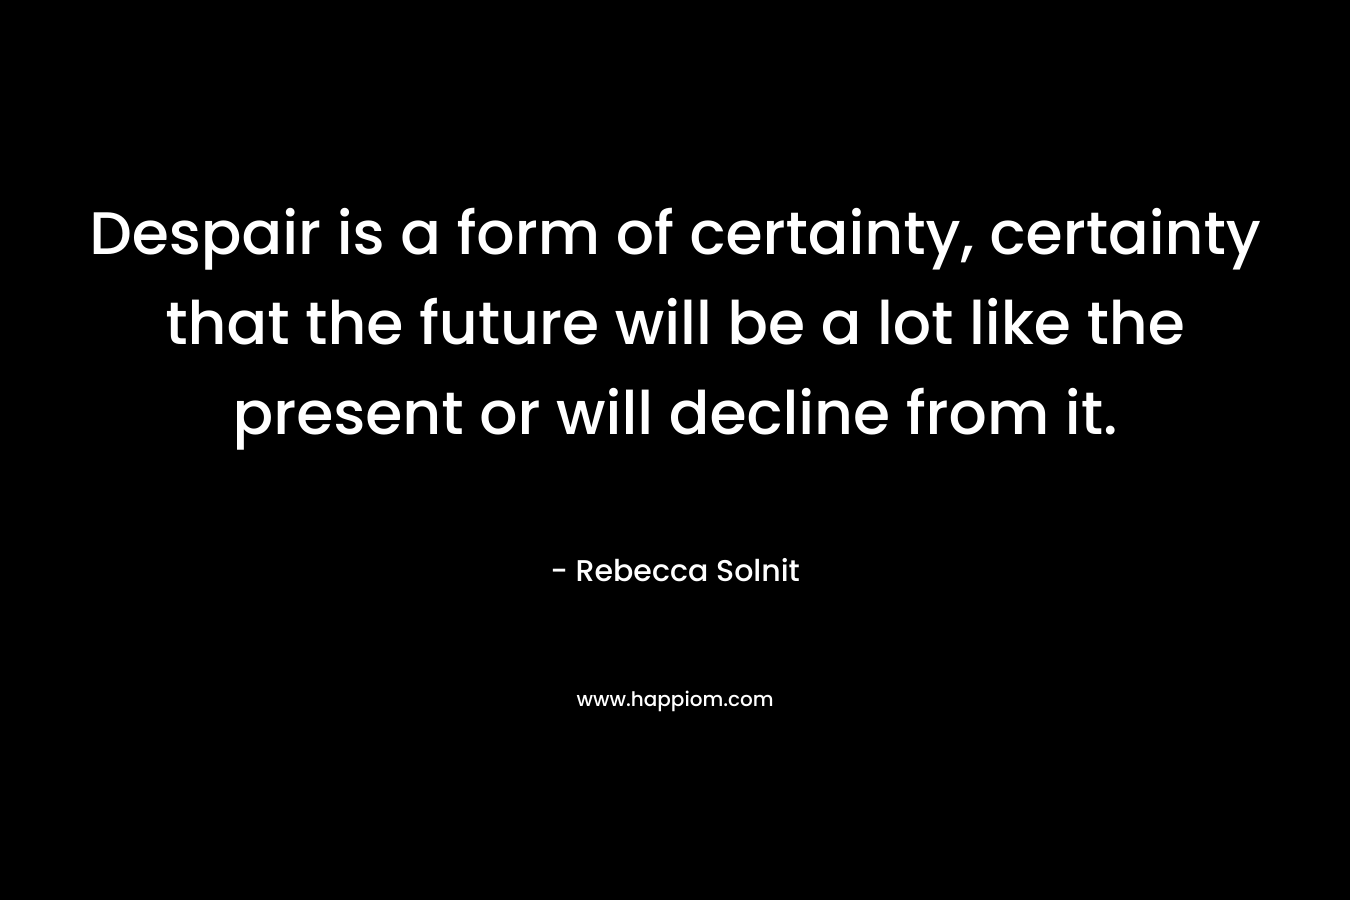 Despair is a form of certainty, certainty that the future will be a lot like the present or will decline from it.